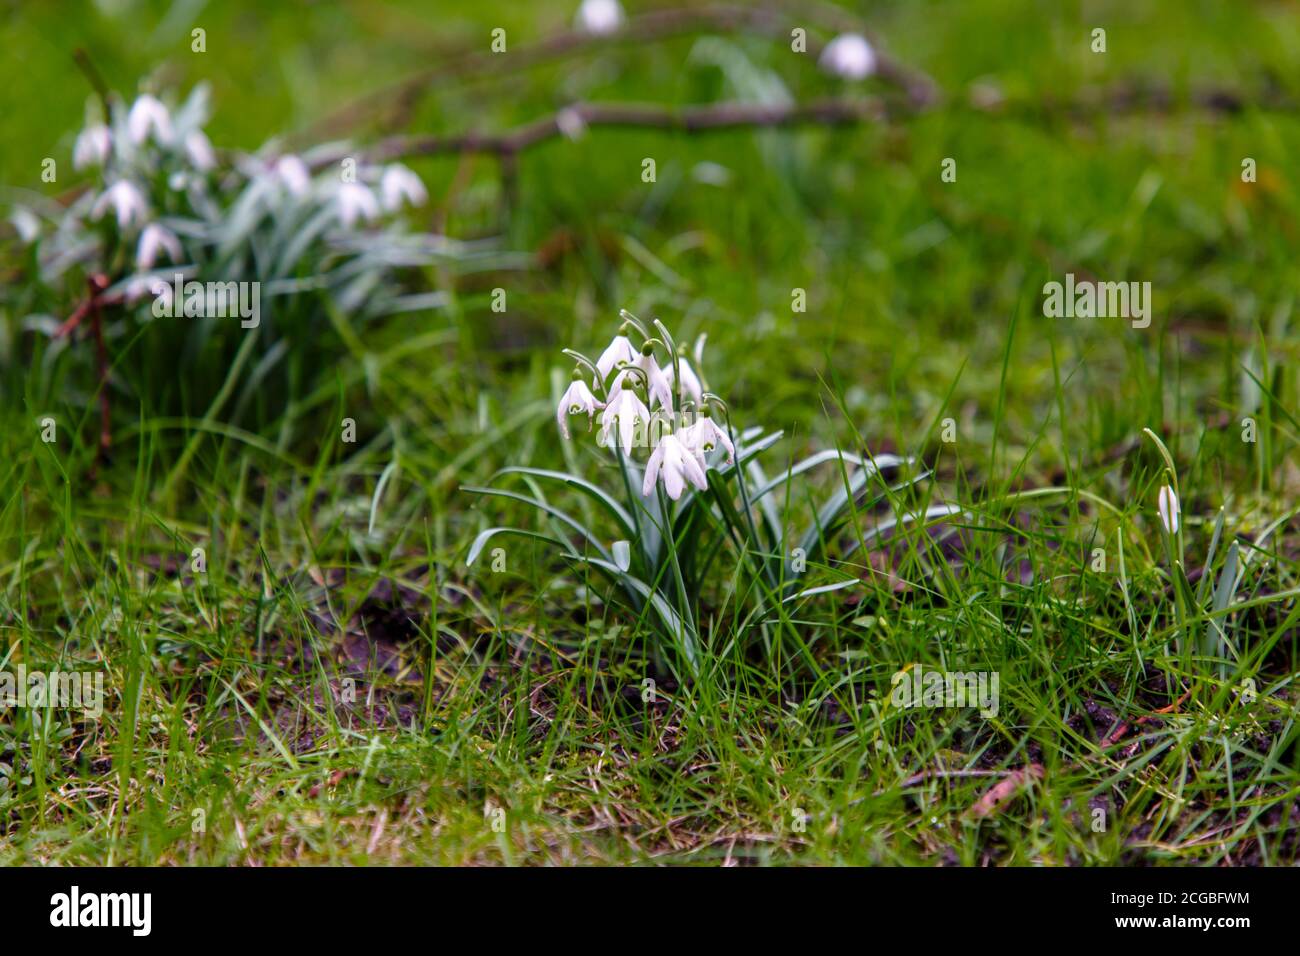 Snowdrop flowers on a green lawn. Stock Photo